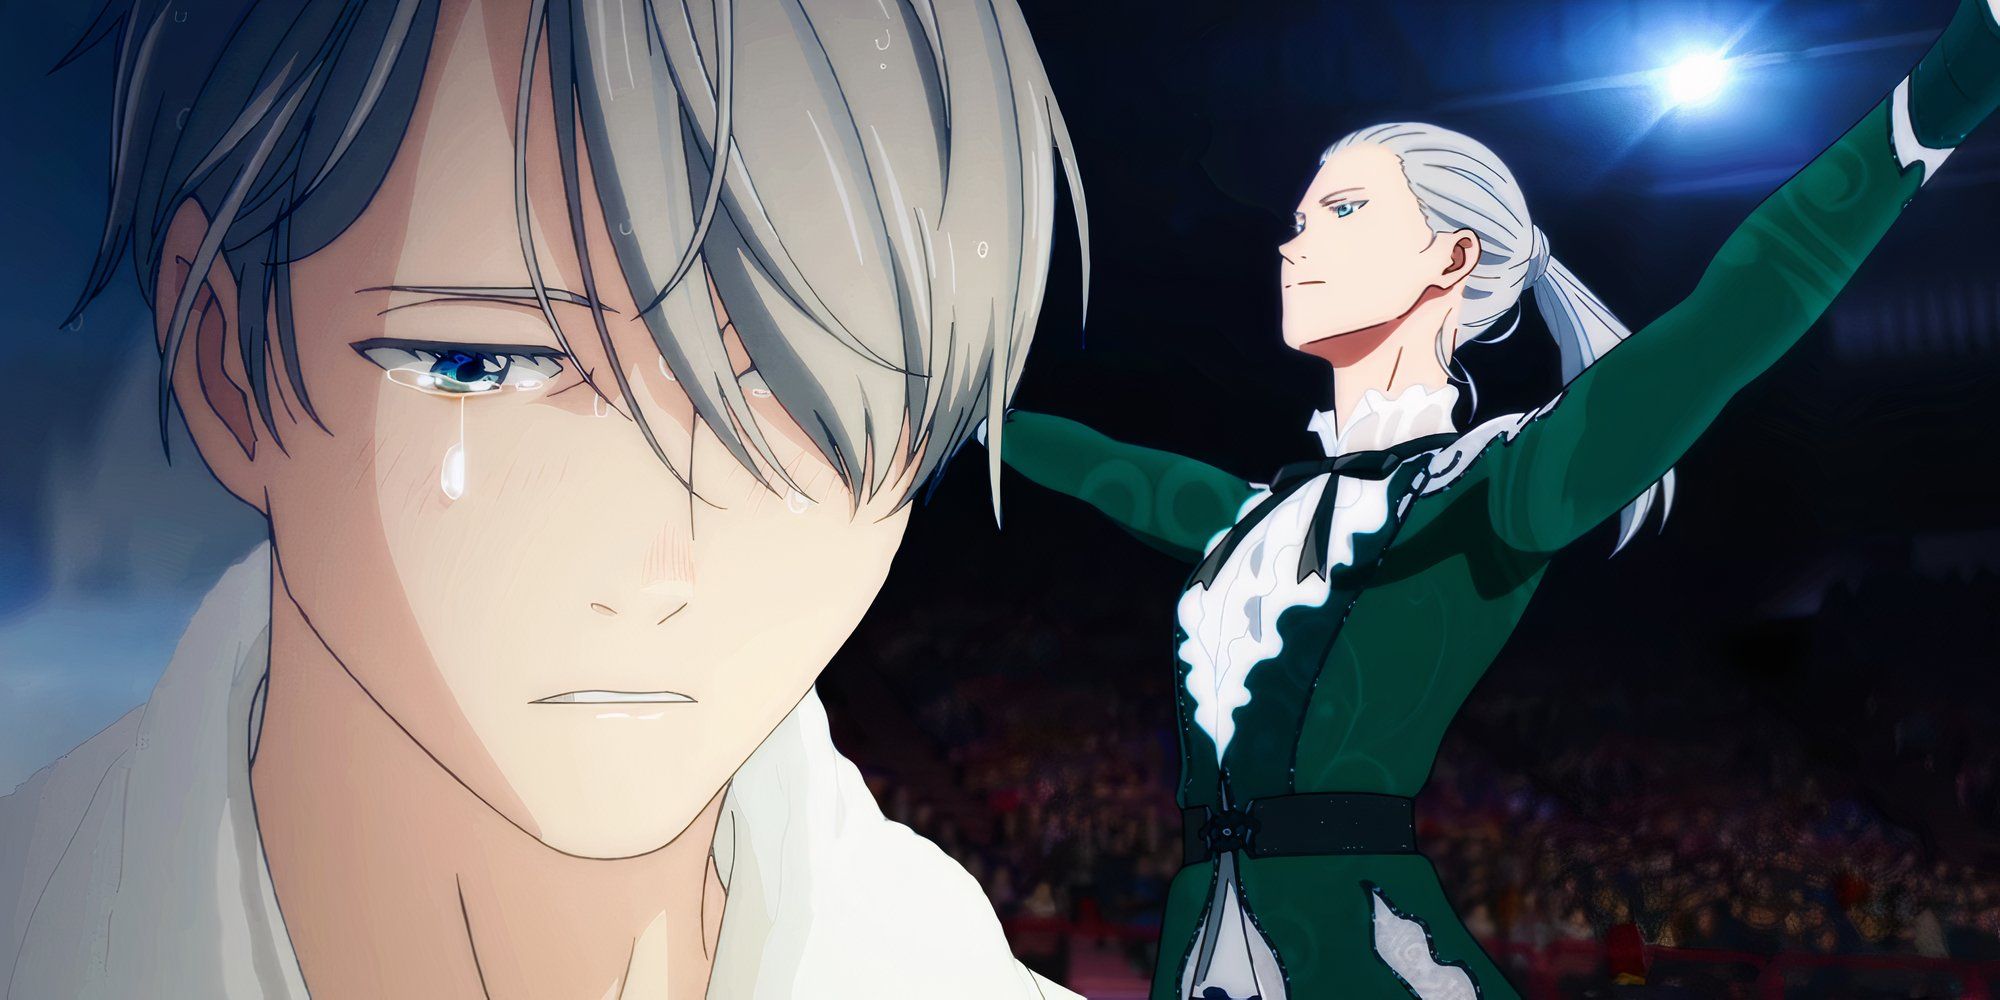 Victor from yuri on ice shedding a tear with ayoung vitor in the background as seen in the trailer for ice adolescence